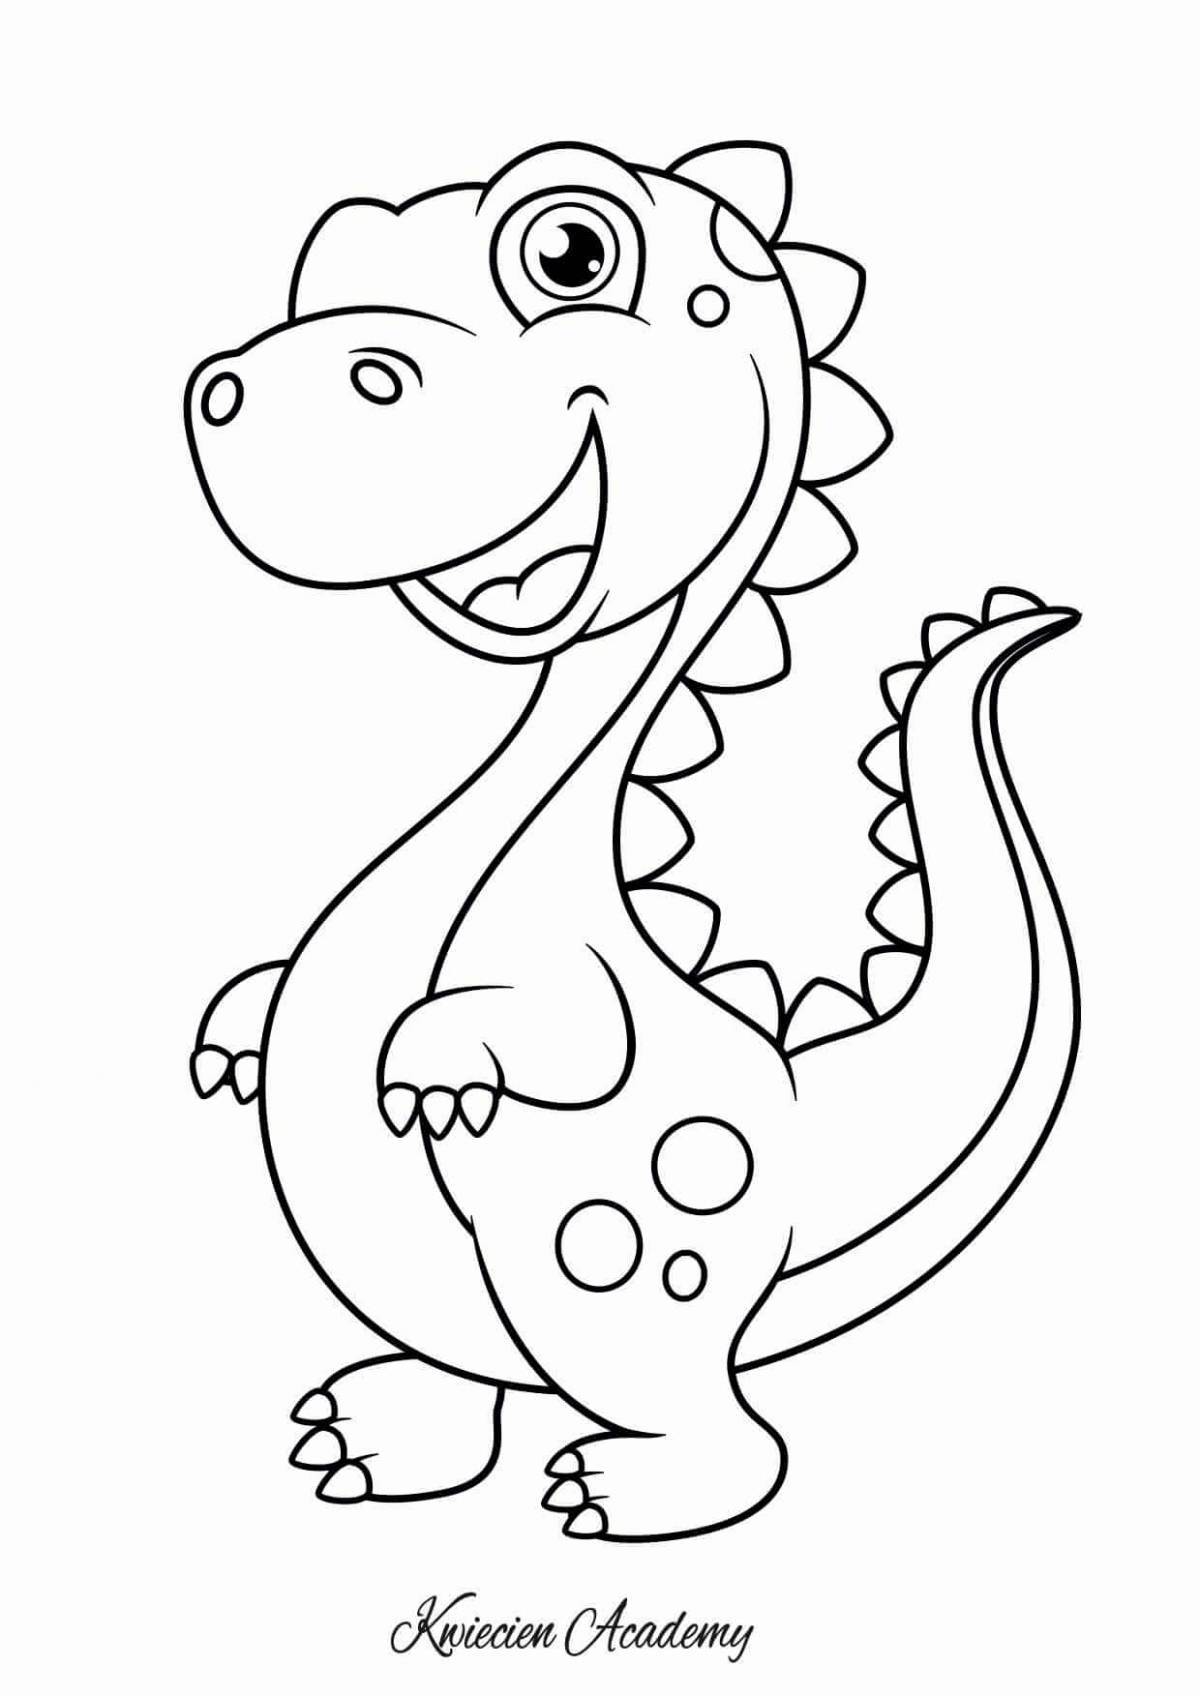 Bright dinosaur coloring book for 3-4 year olds